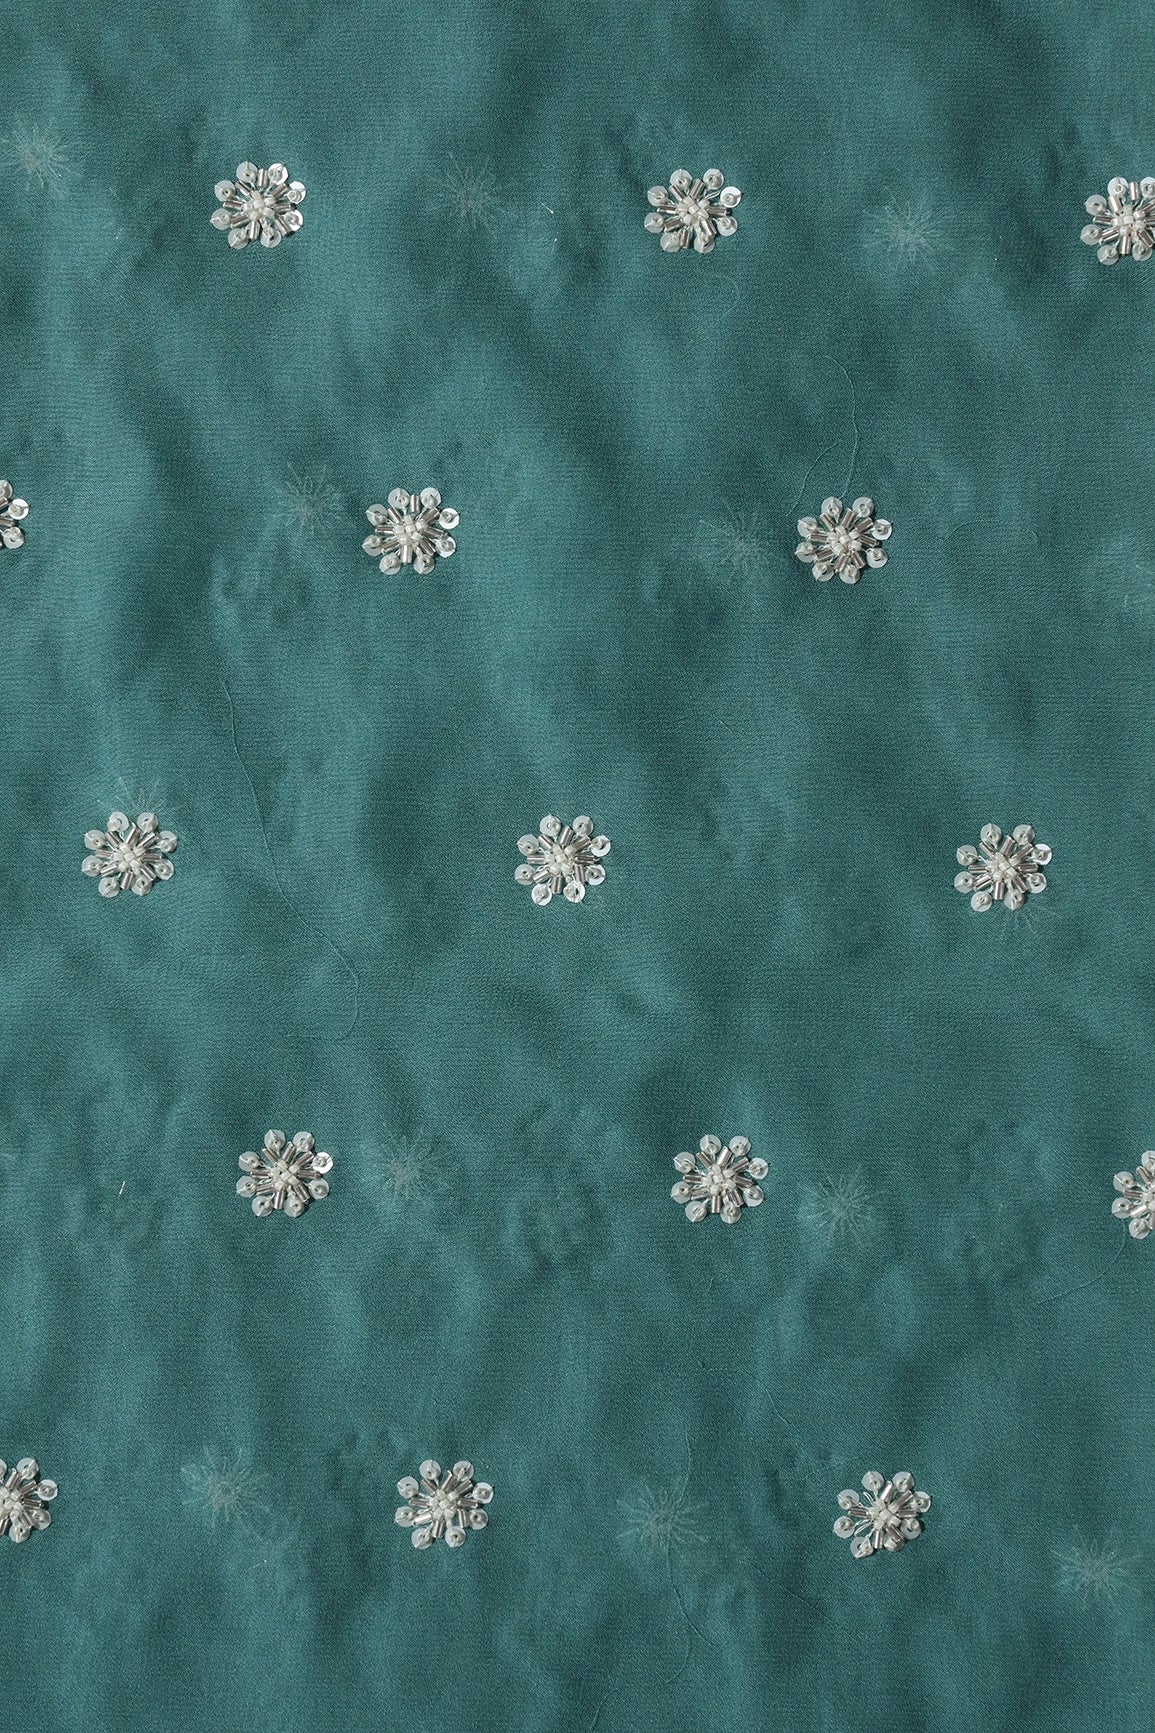 Silver Beads With Sequins Small Floral Handwork Embroidery On Teal Viscose Georgette Fabric